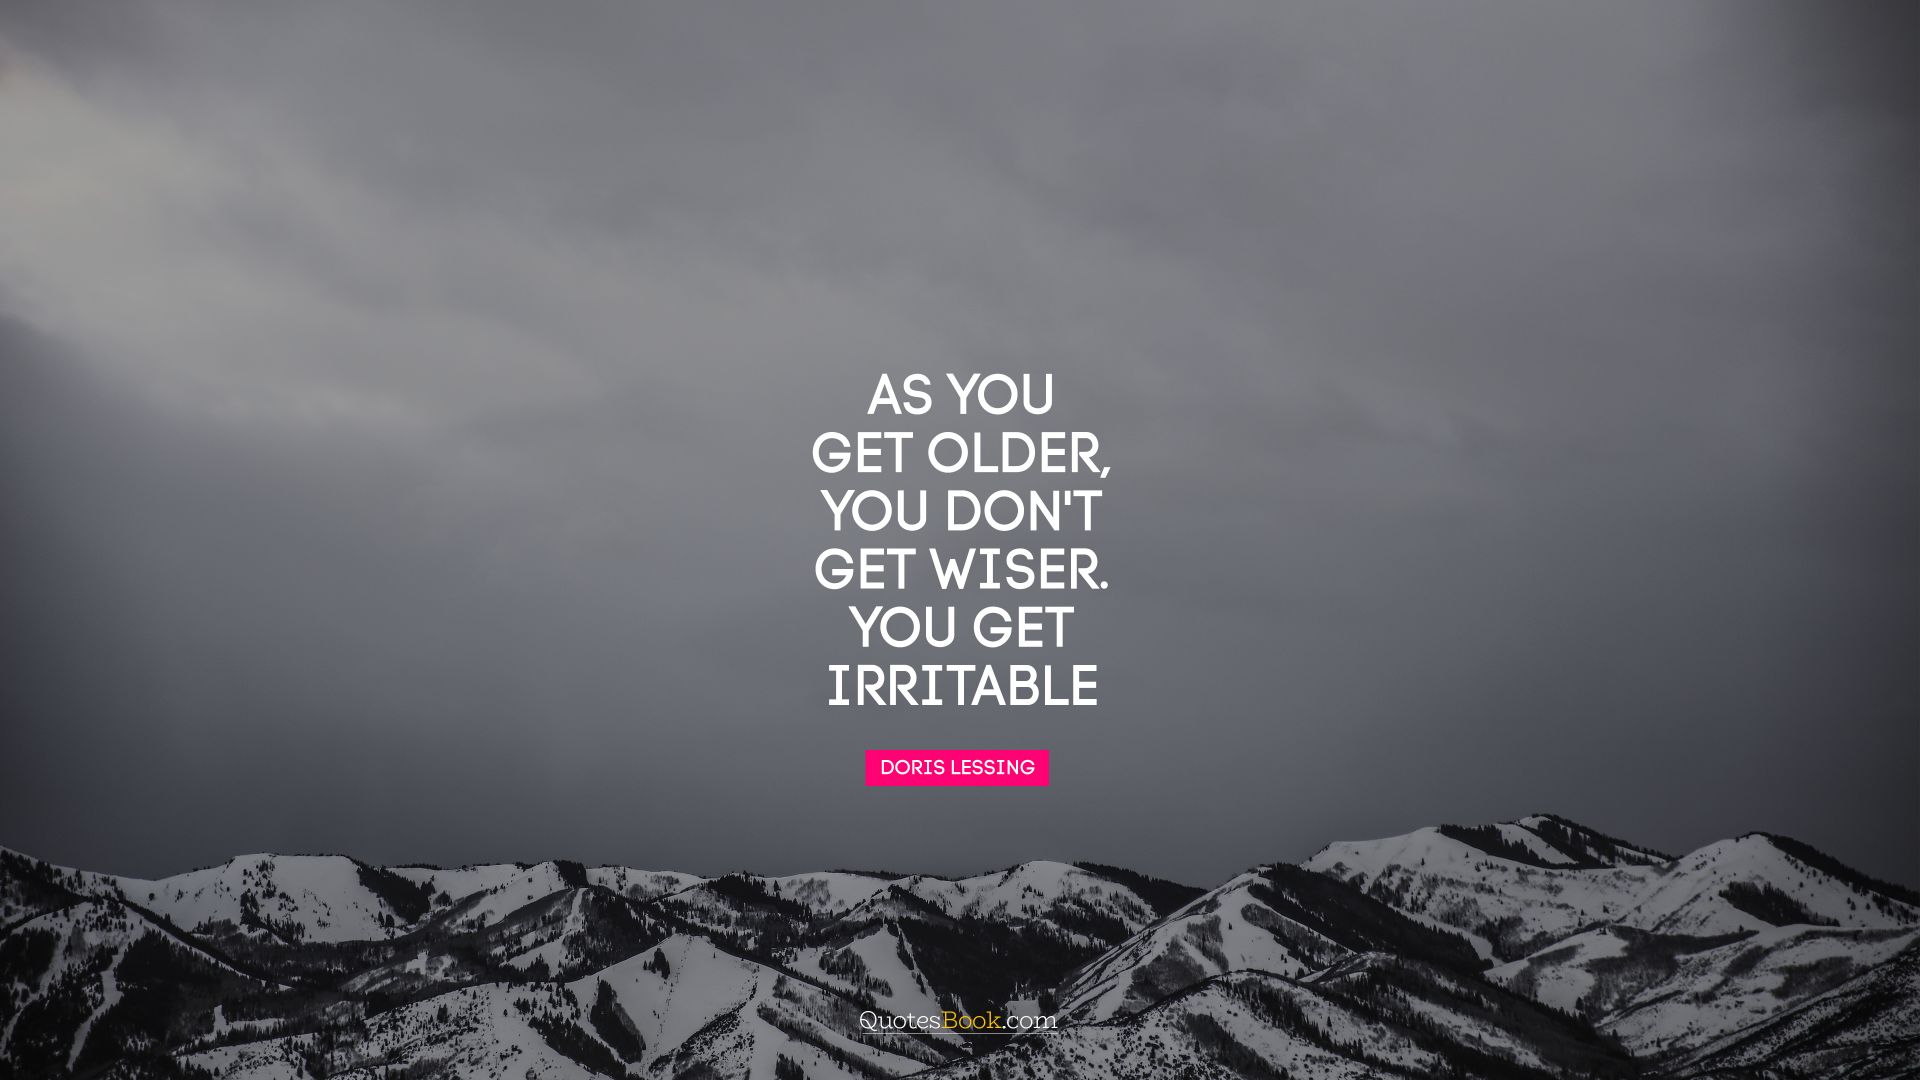 As you get older, you don't get wiser you get irritable. - Quote by Cilla Black